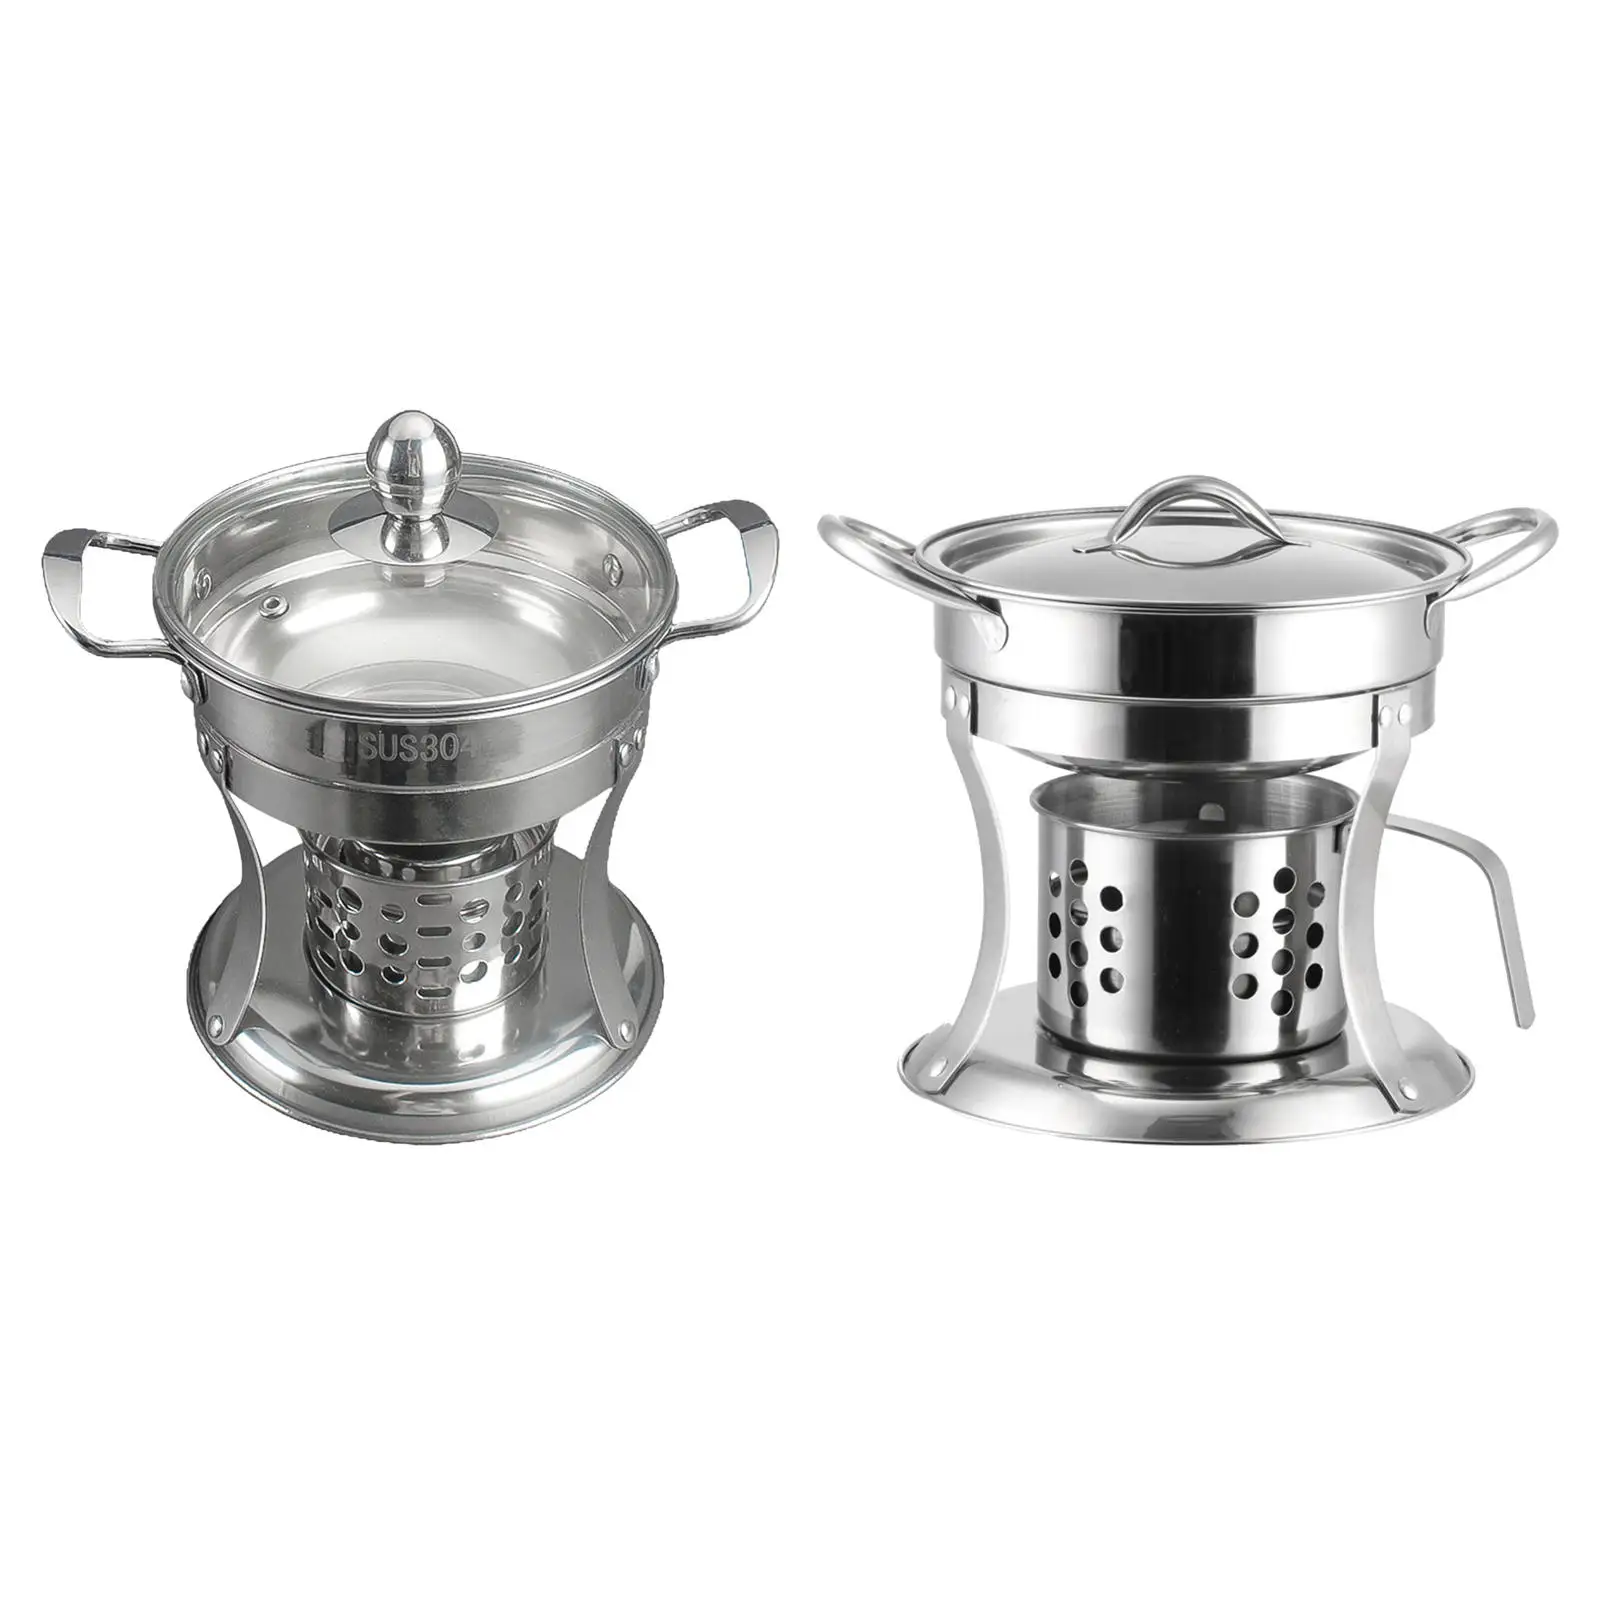 Hot Pot Stainless Steel Chafing Dish Pot Single Mini Cooking Pot Alcohol Burner for Indoor Camping Picnic